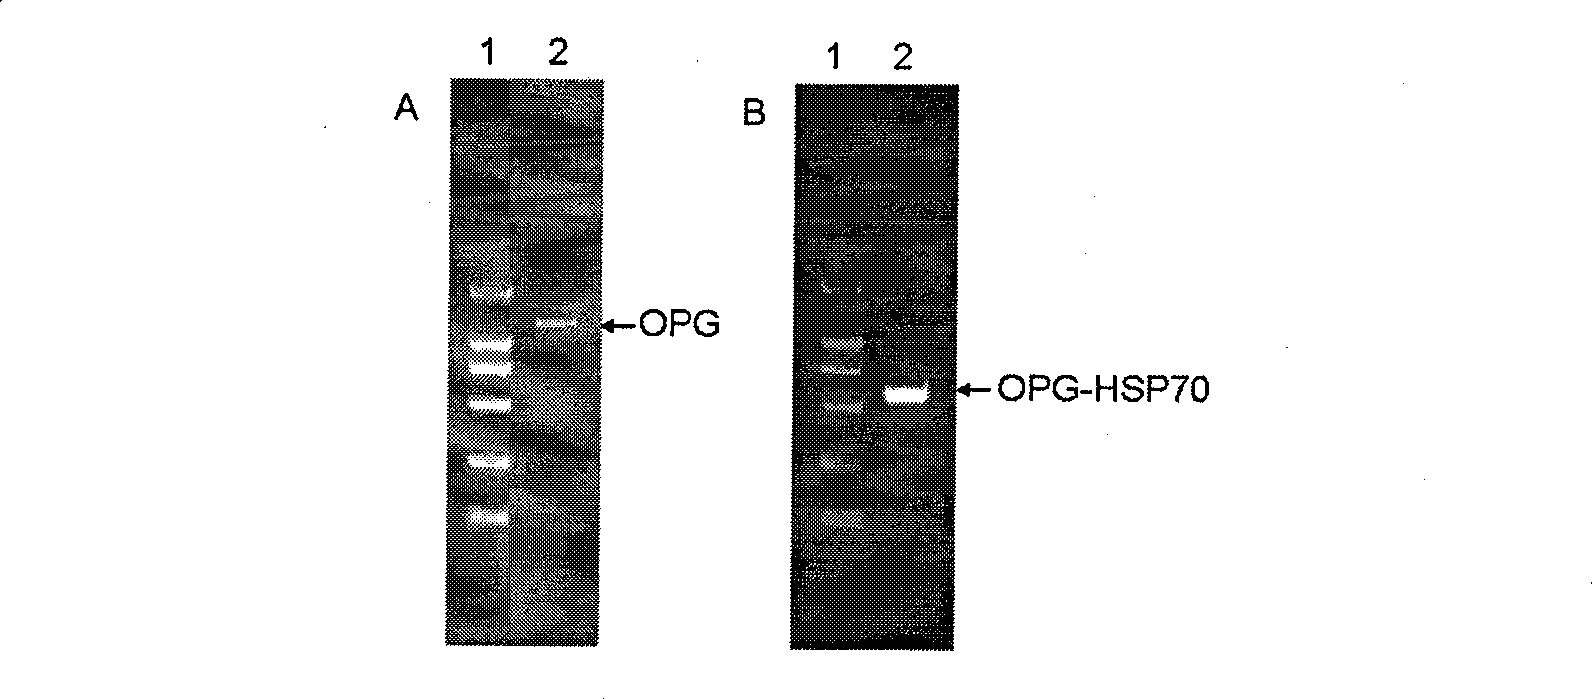 Preparation and use of OPG-HSP70 fusion protein